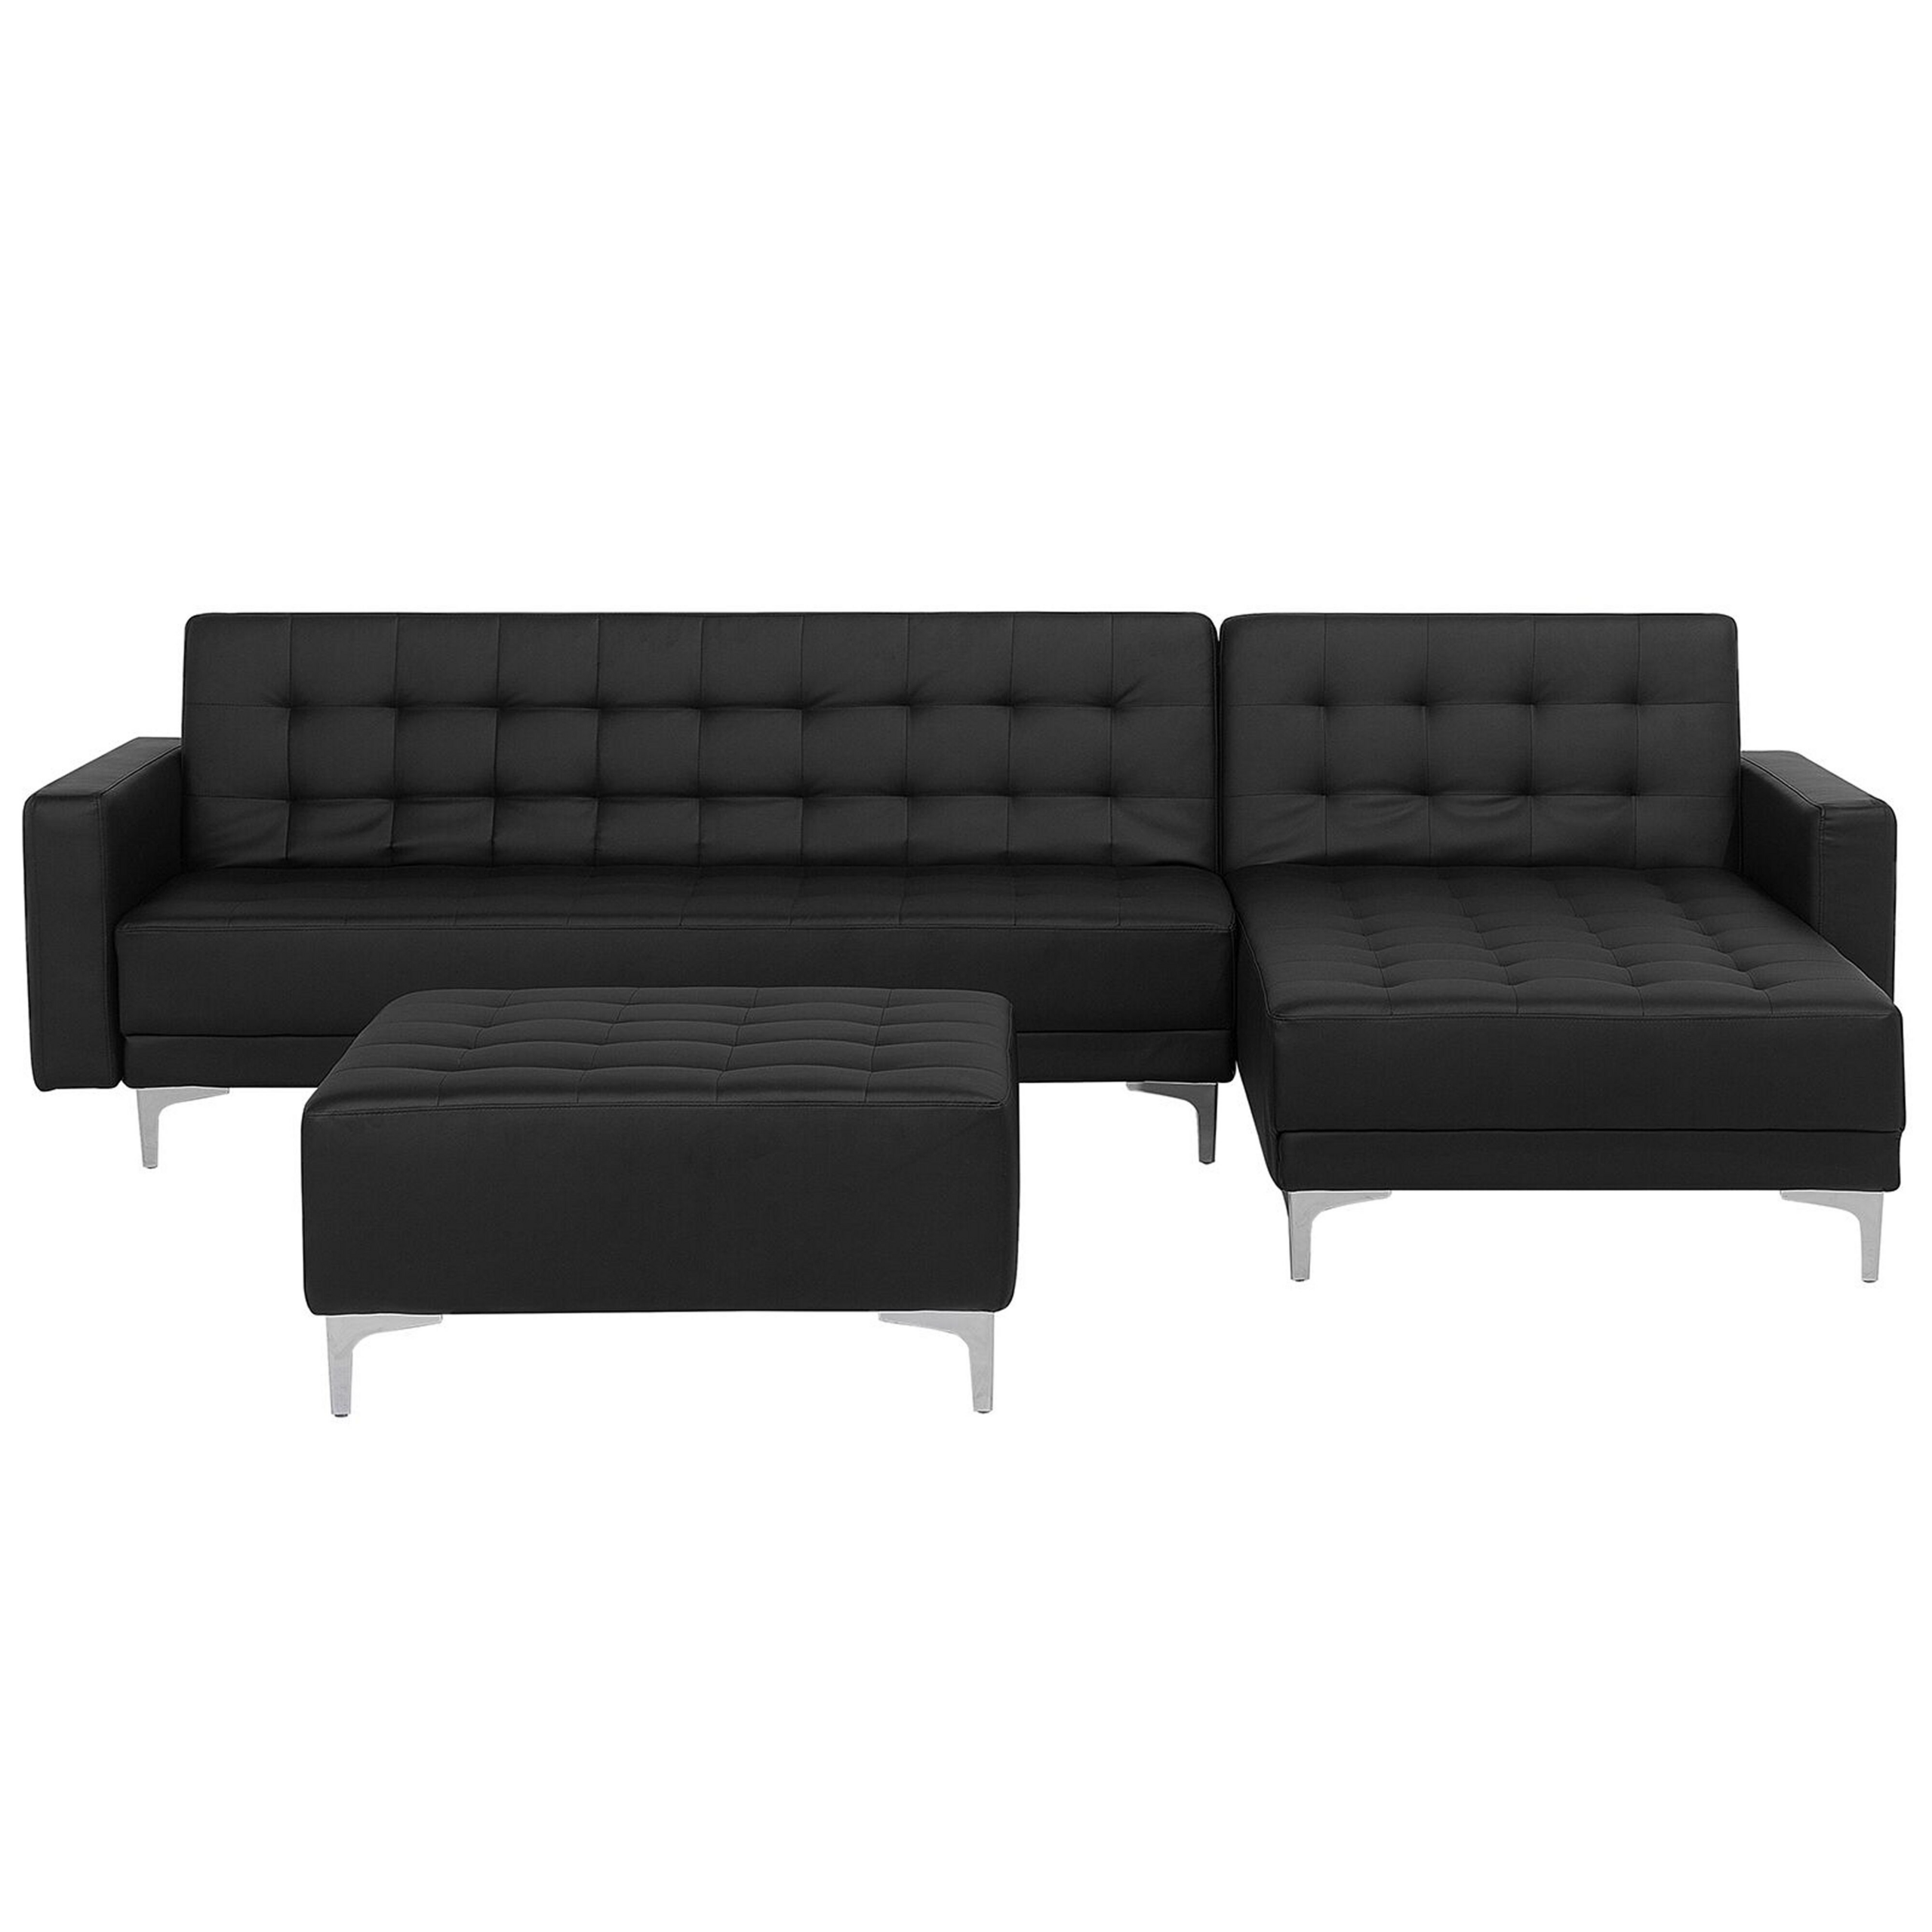 Beliani Corner Sofa Bed Black Faux Leather Tufted Modern L-Shaped Modular 4 Seater with Ottoman Left Hand Chaise Longue